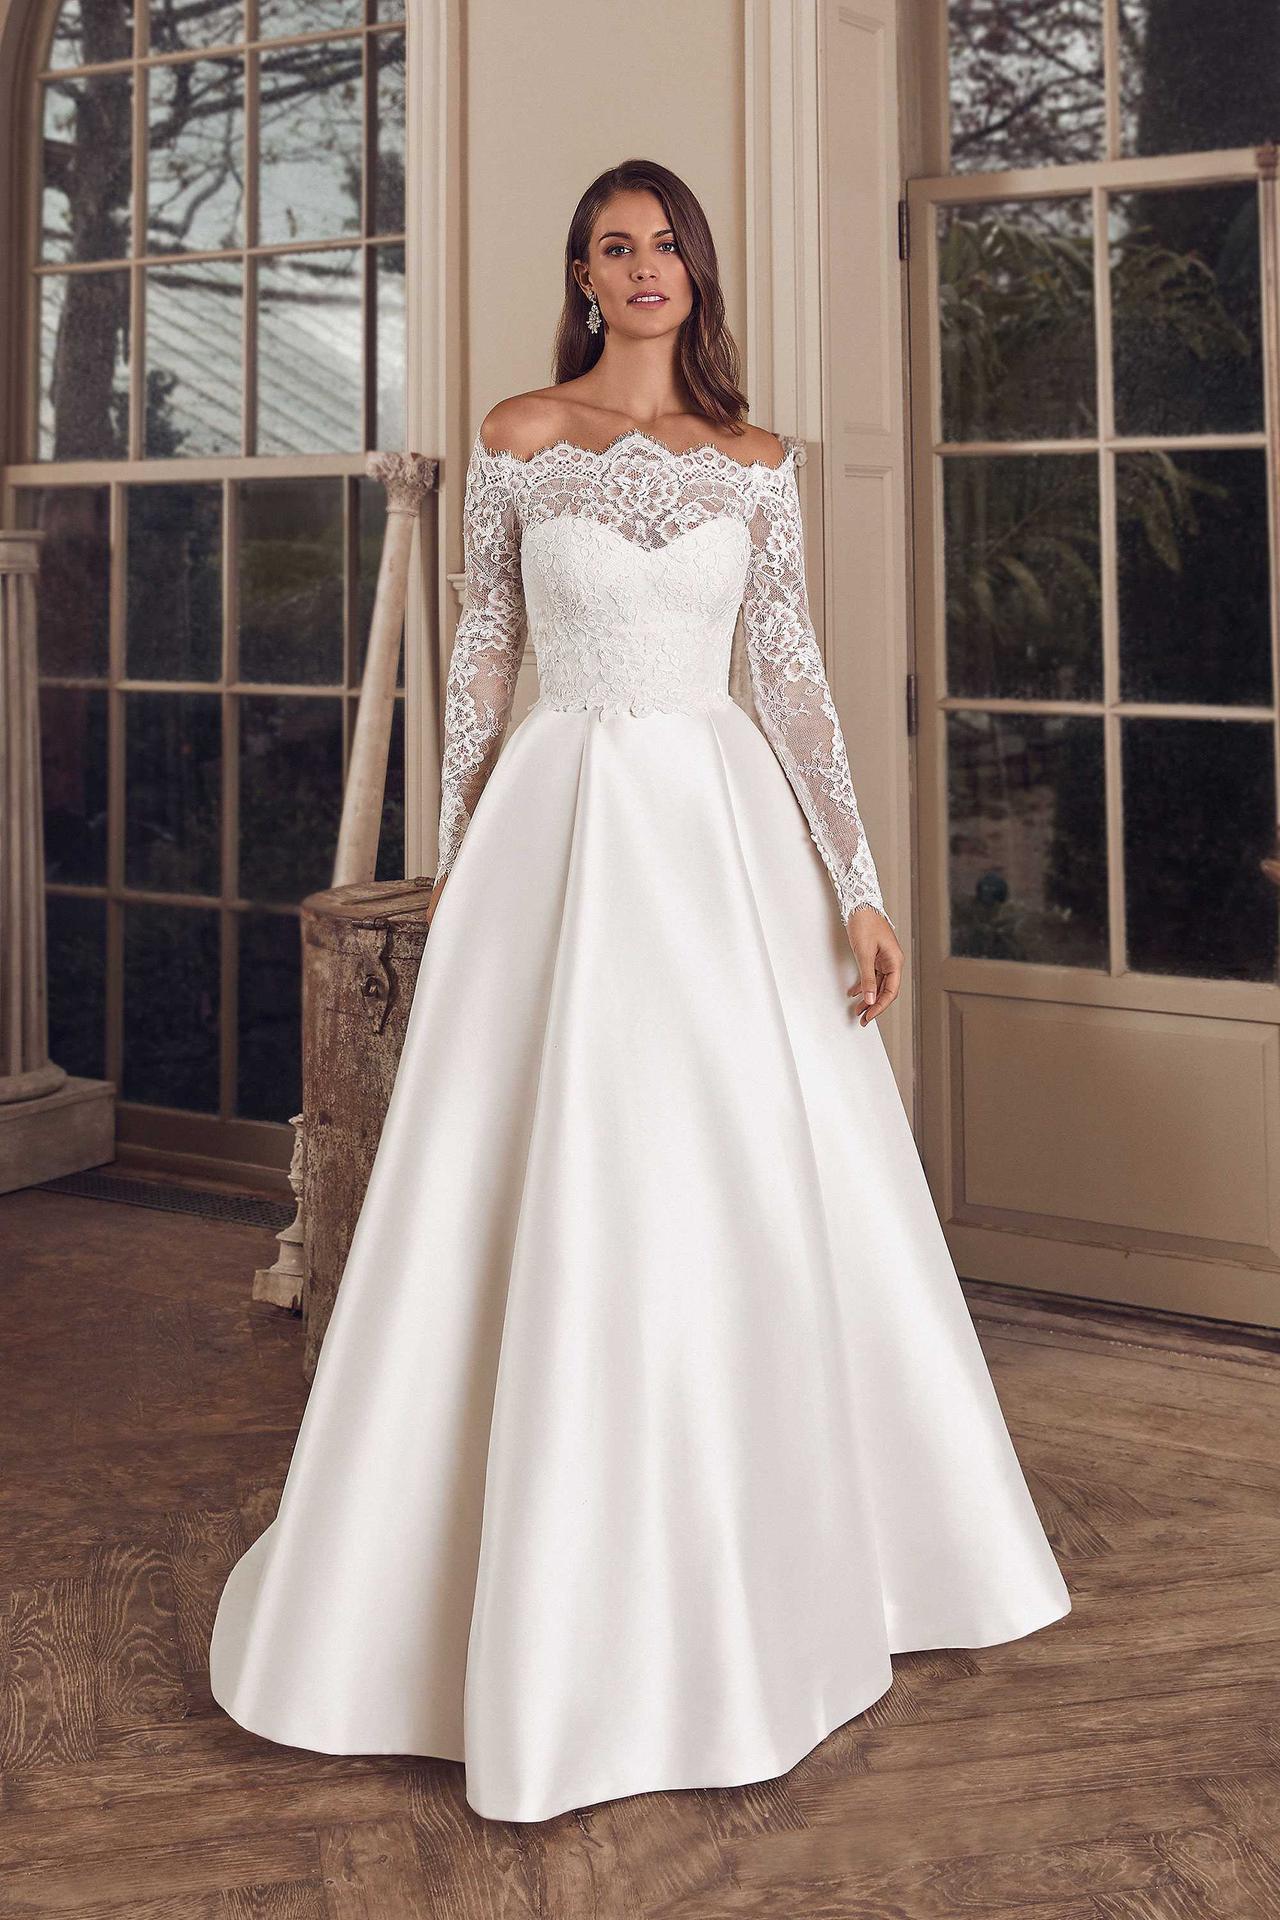 Best Wedding Dress Style For Broad Shoulders  Wedding dress styles,  Wedding dress big bust, Bridal gowns